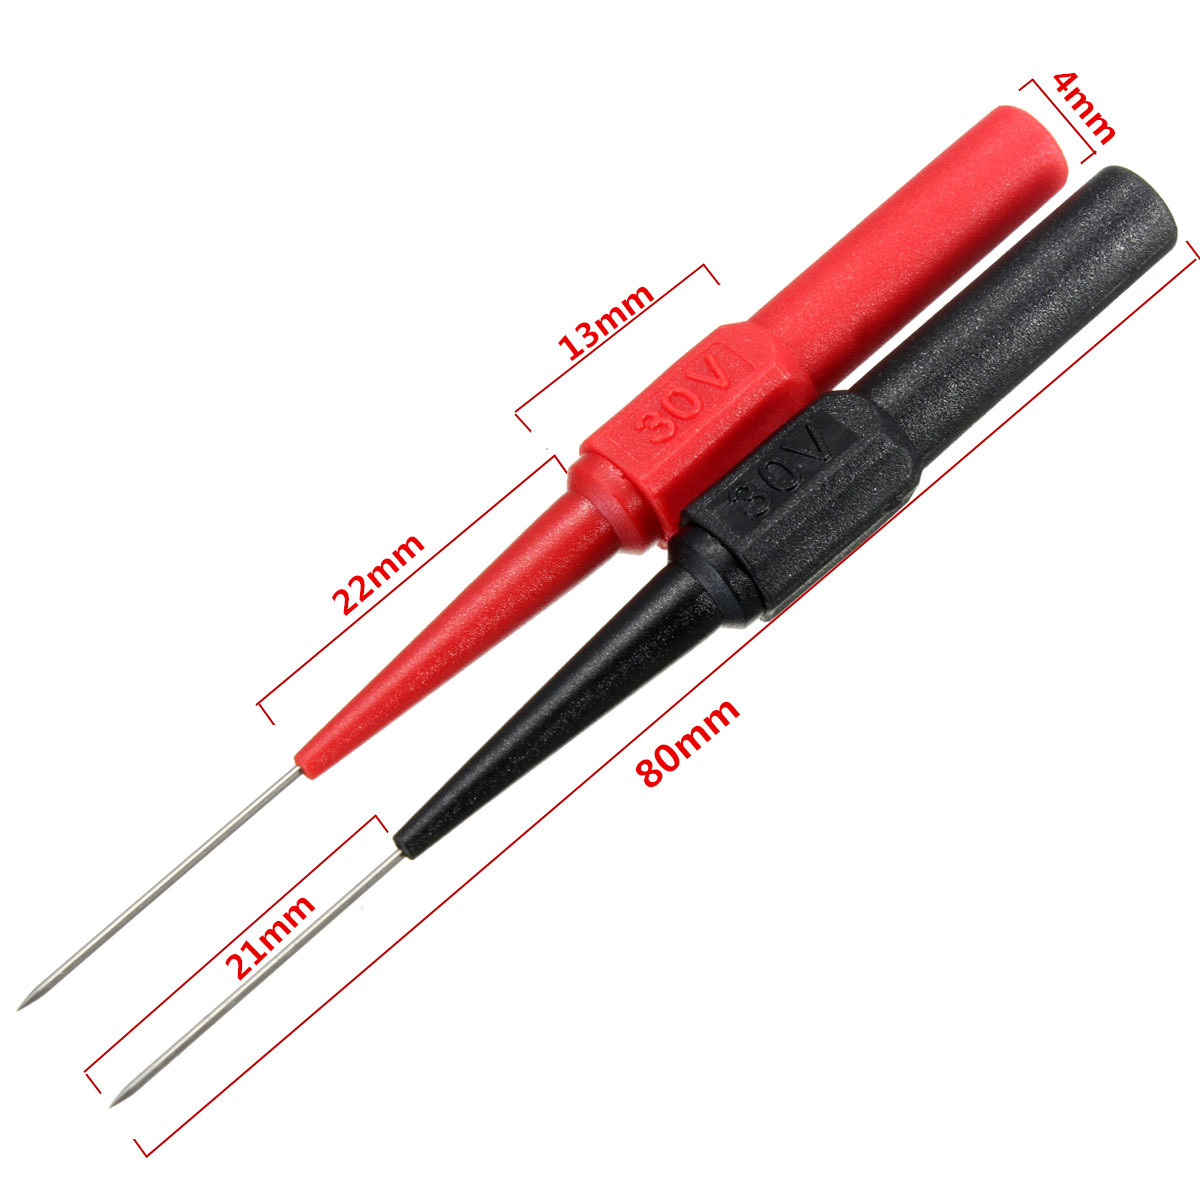 Details about   2Pcs Insulated Quick Piercing Test Needle Hook Clips Multimeter Testing Probes 